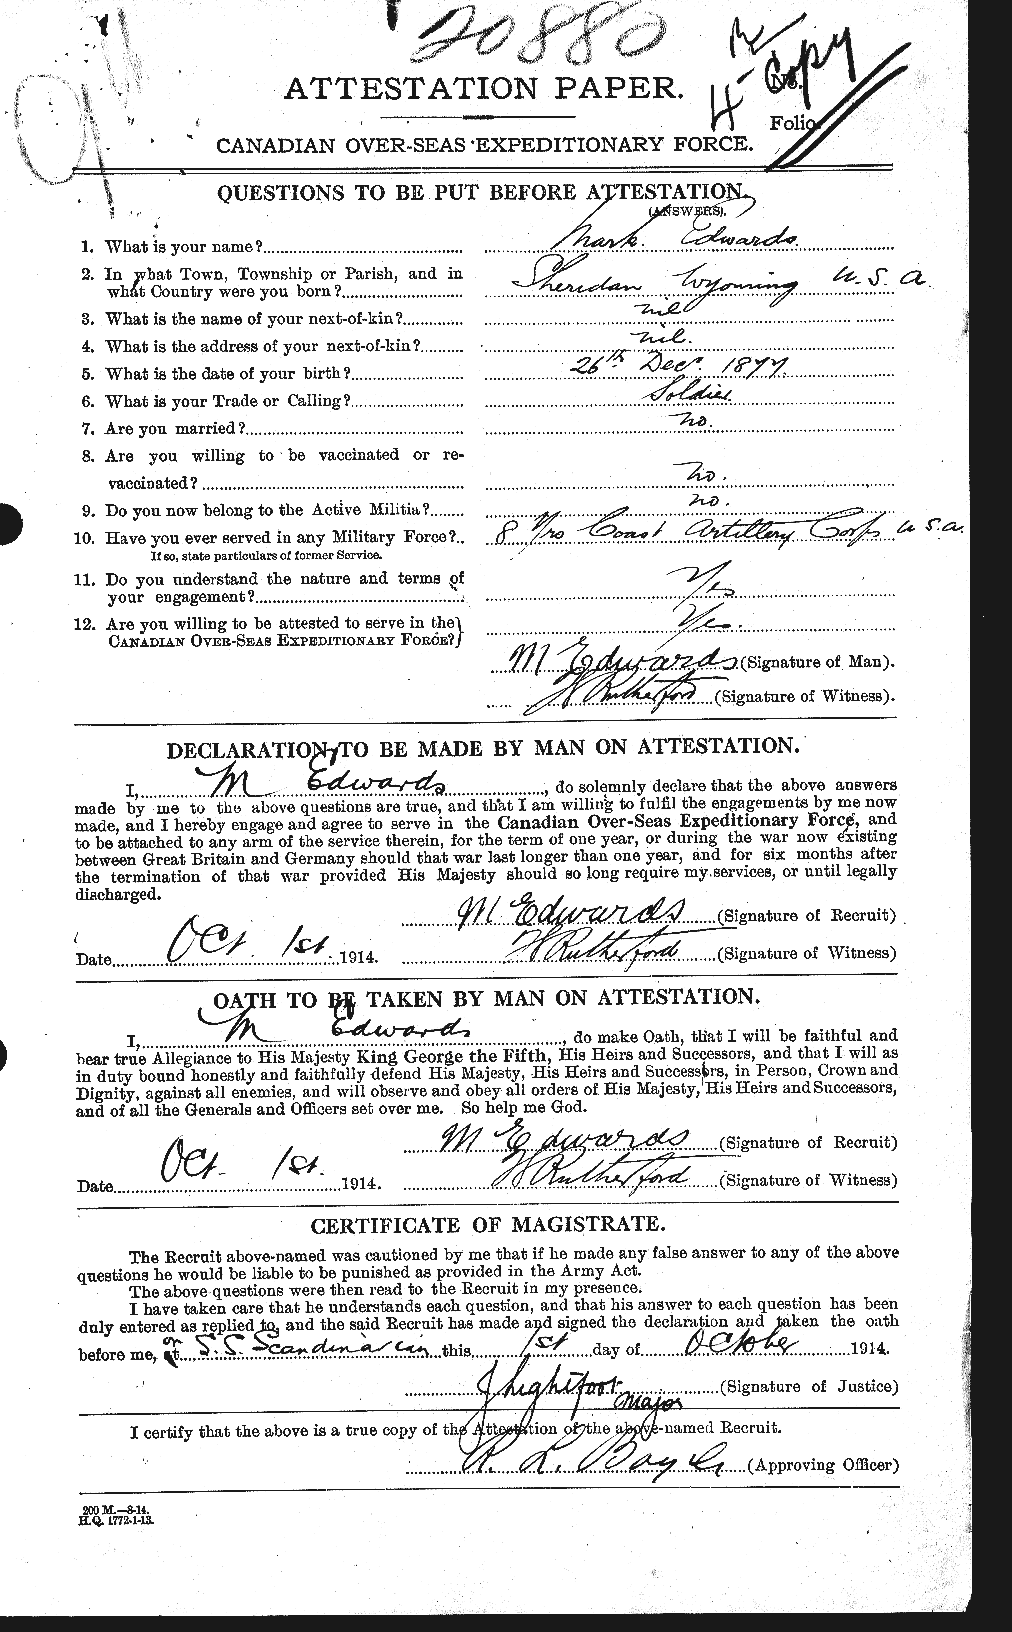 Personnel Records of the First World War - CEF 310209a